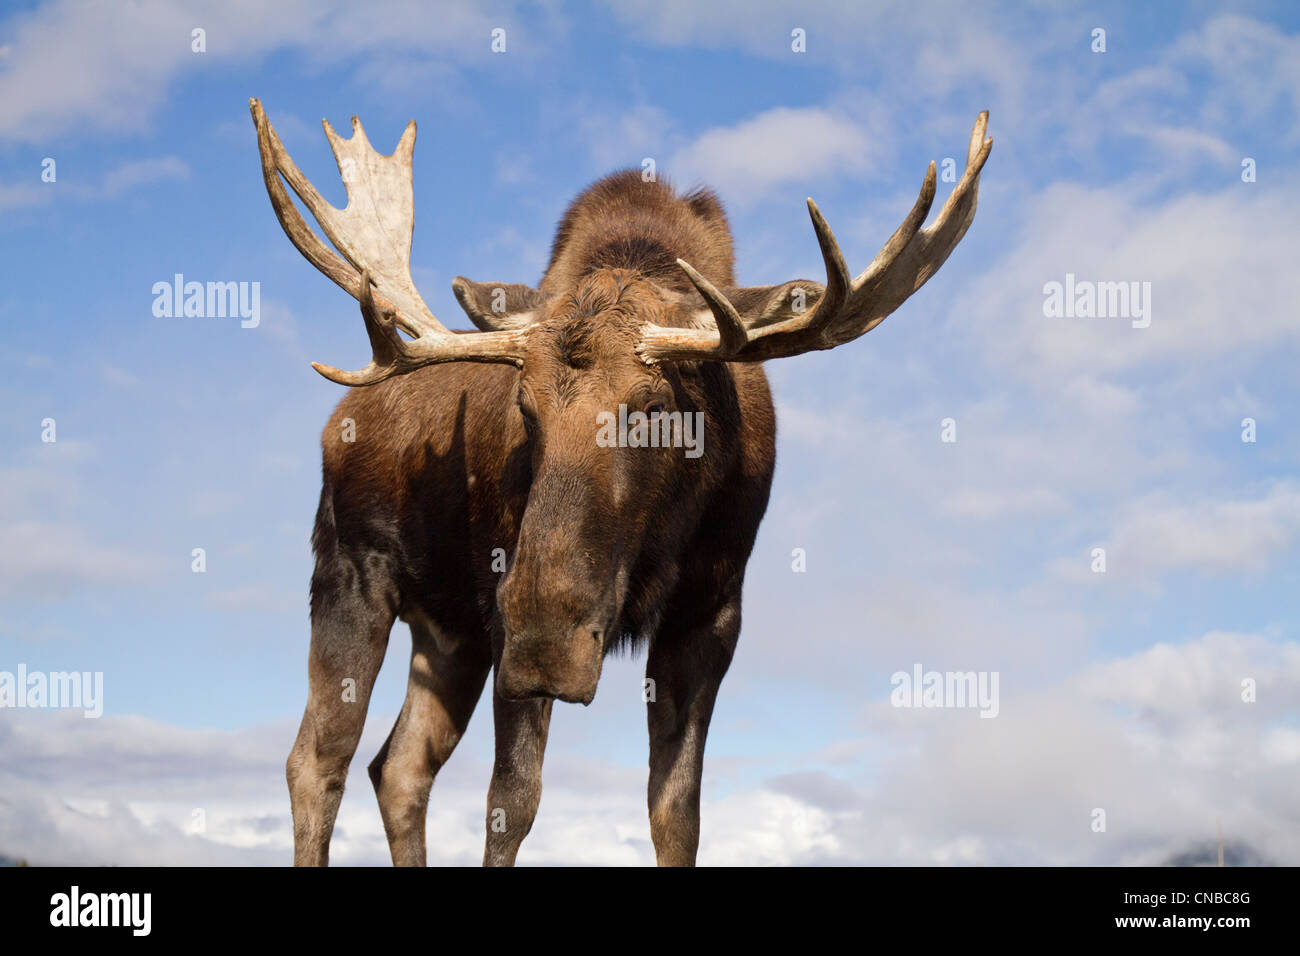 CAPTIVE: Close up and low angle view of a bull moose, Alaska Wildlife Conservation Center, Southcentral Alaska, Autumn Stock Photo